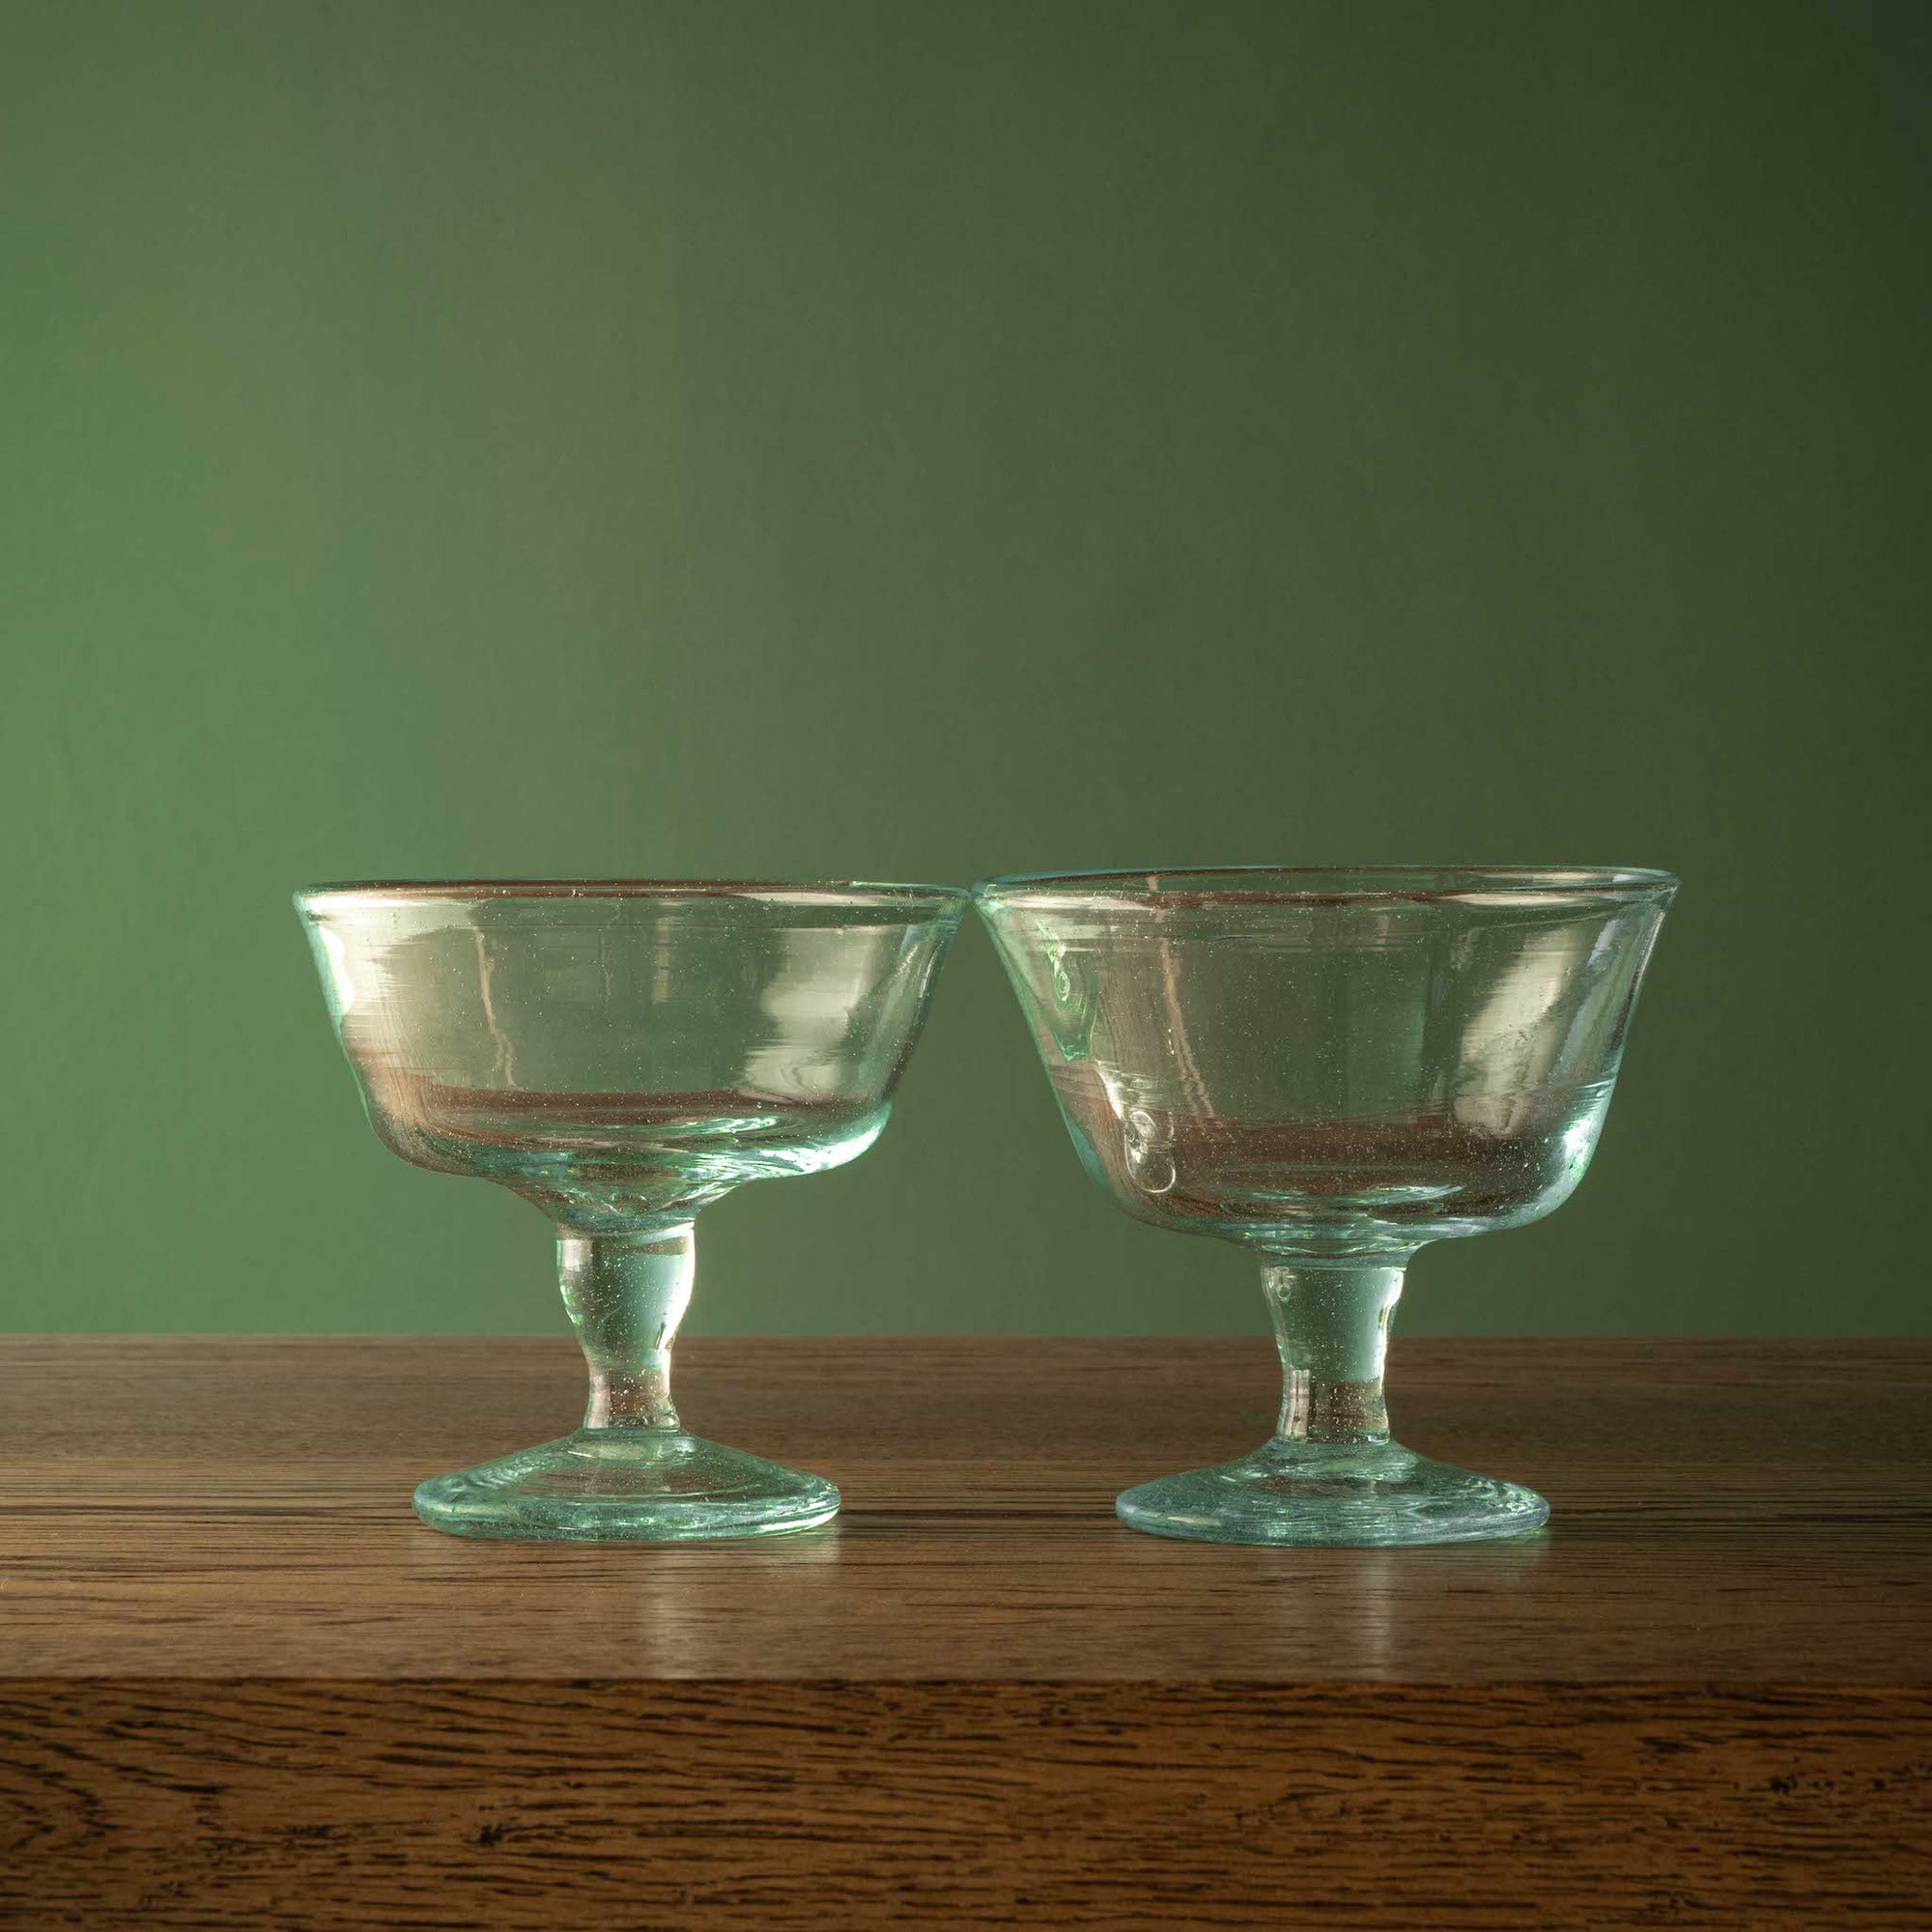 La Soufflerie Coppa Glass hand blown from recycled glass